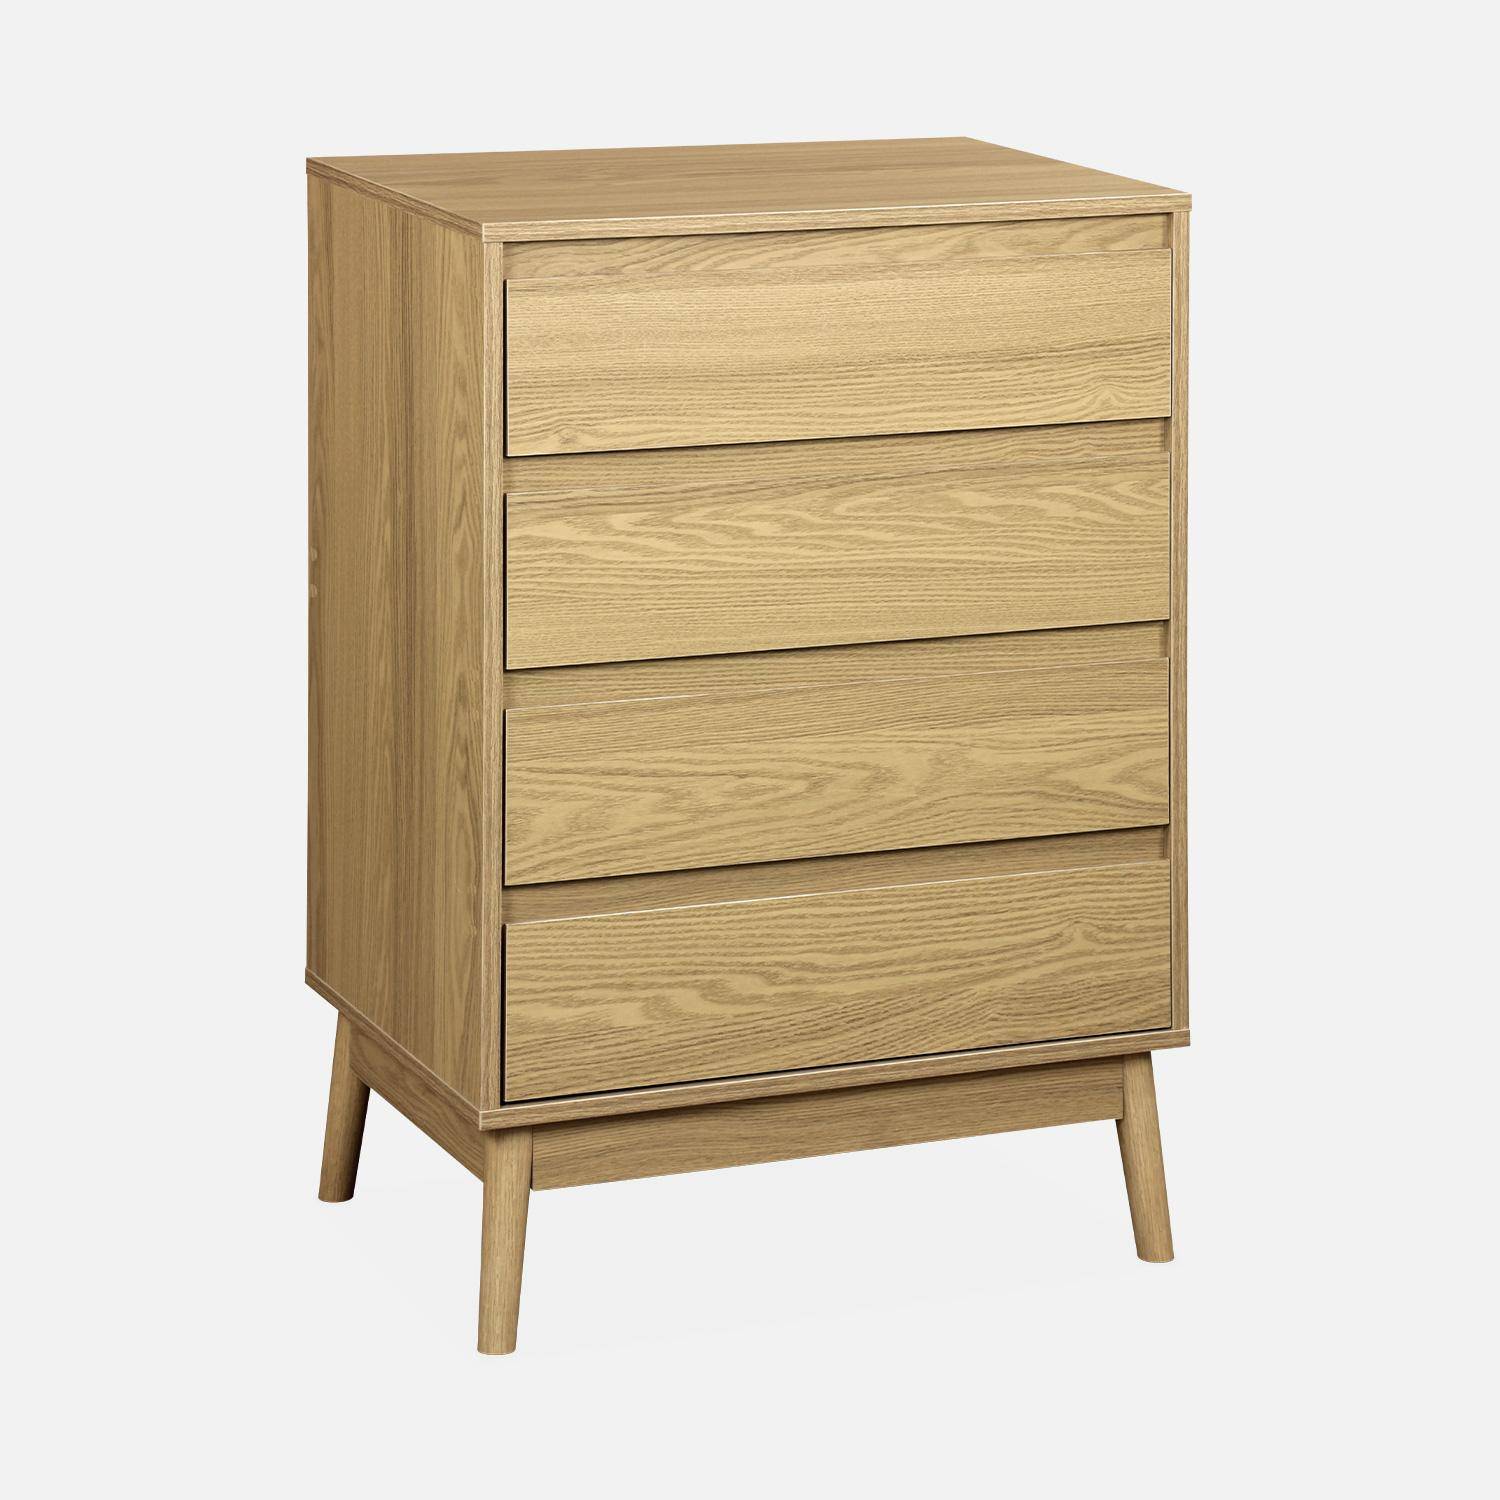 Wooden 4-drawer chest, 60x40x91cm - Dune - Natural wood colour Photo3